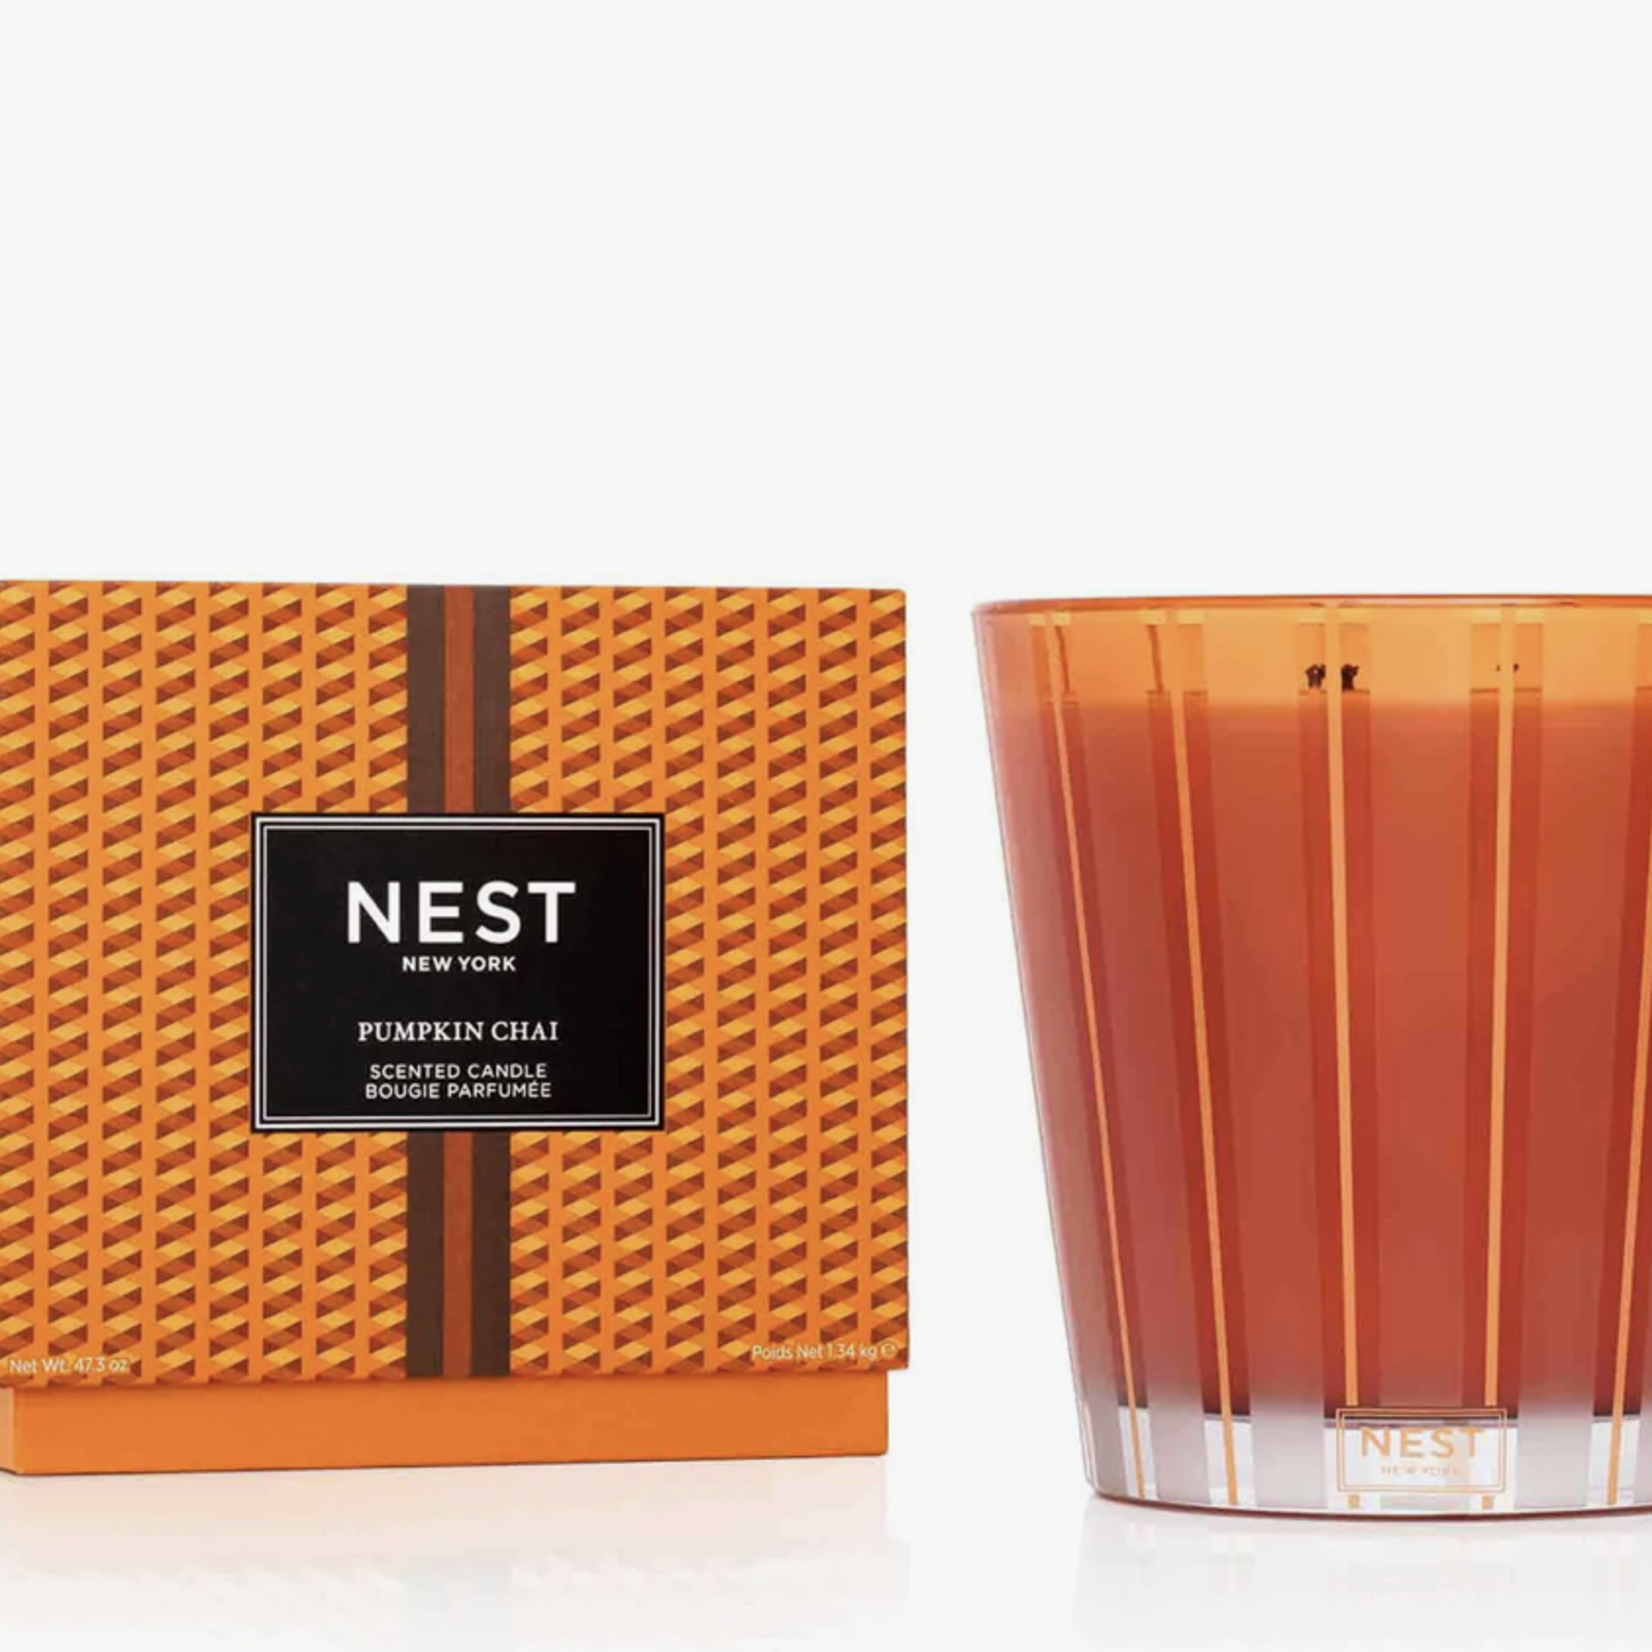 NEST, 3-Wick Candle 21.2 oz